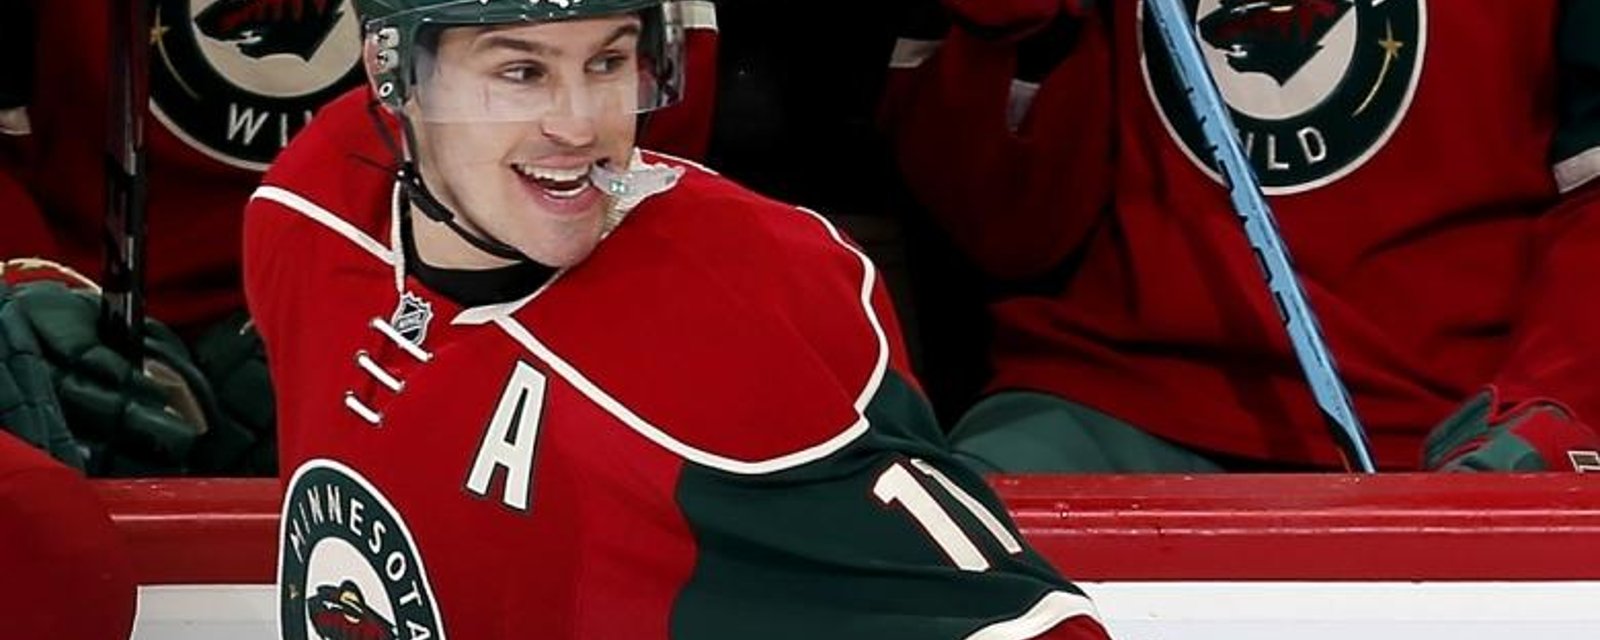 Wild star reportedly played major role in bringing Eric Stall to Minnesota.